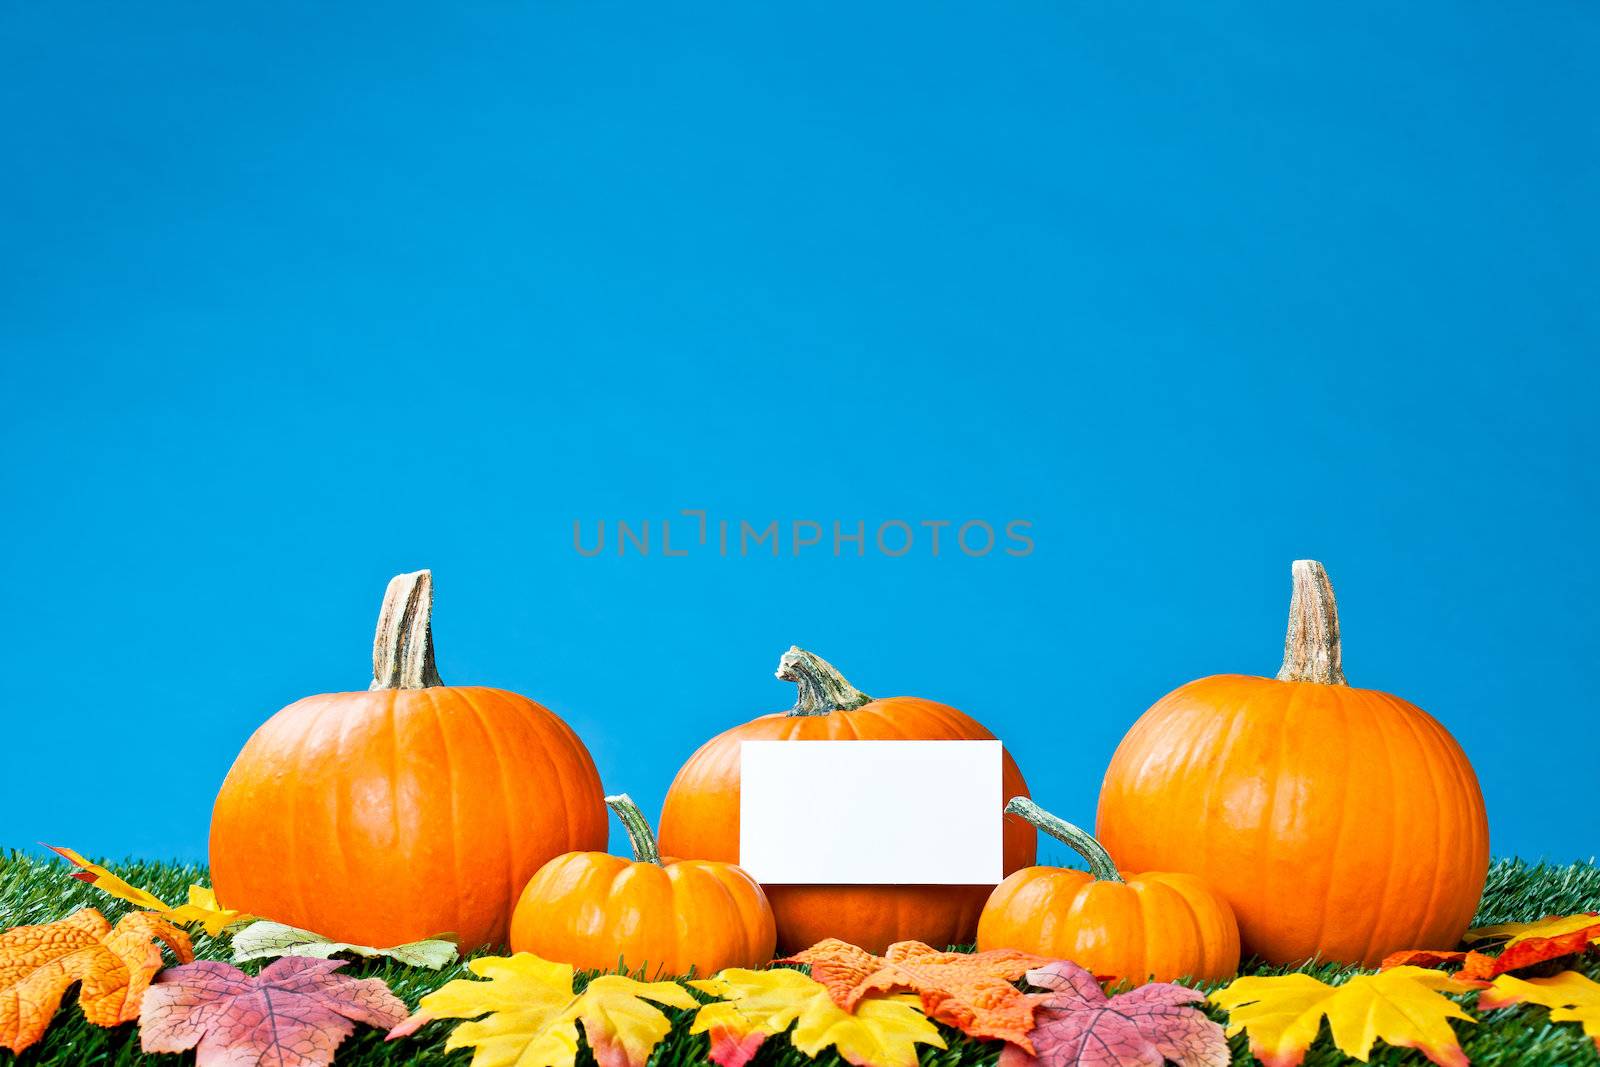 View of pumpkins with placard over blue background.